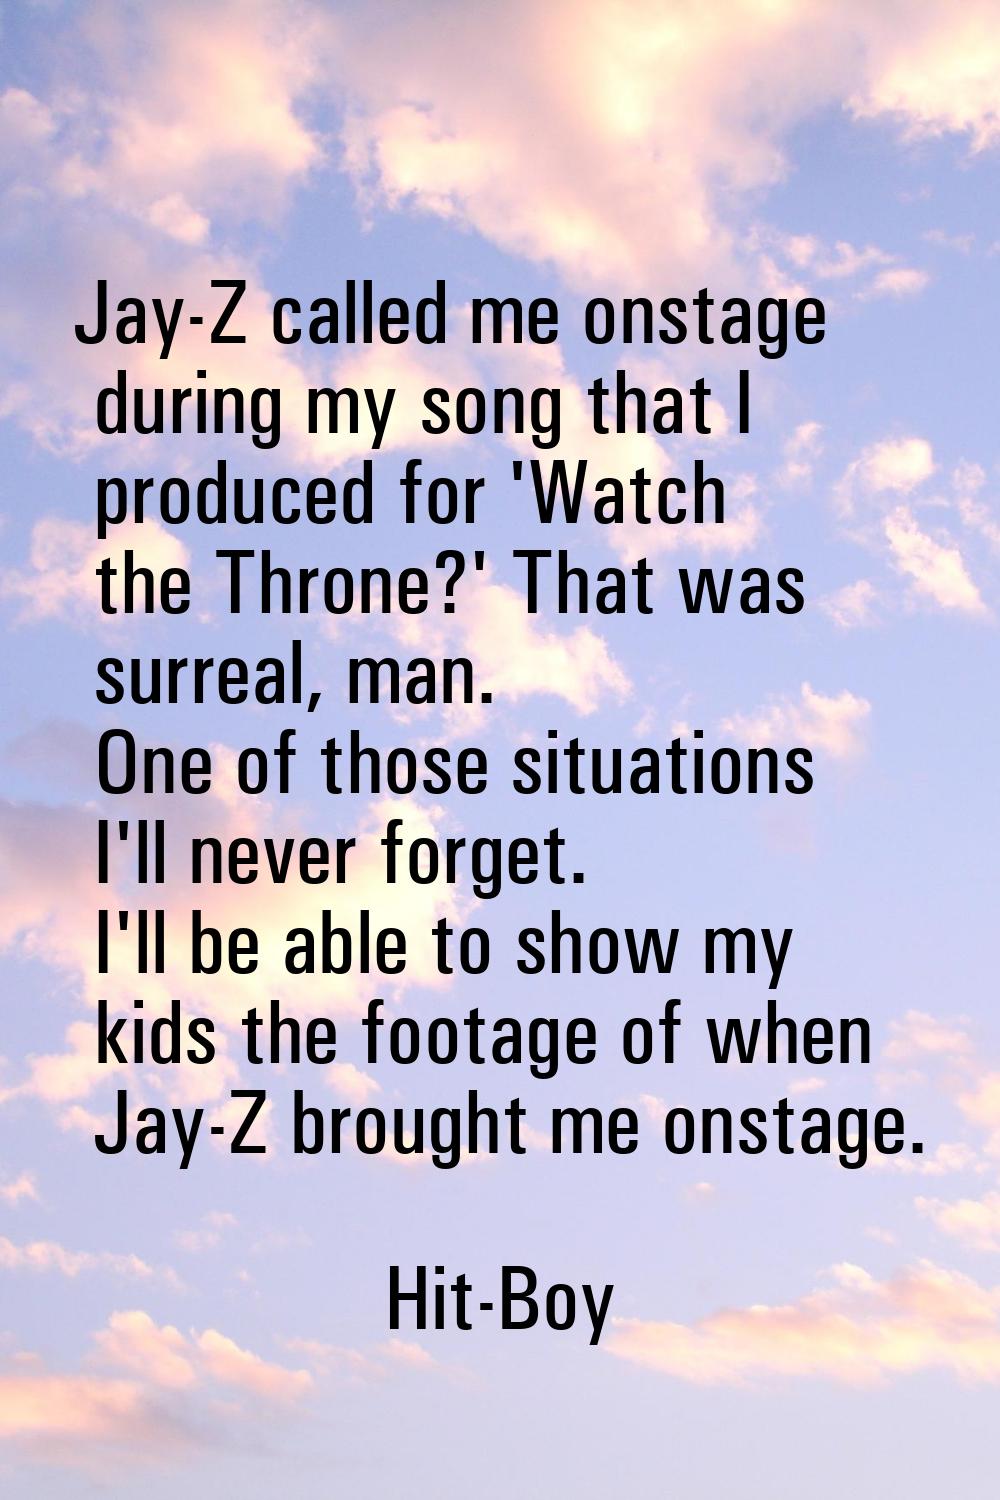 Jay-Z called me onstage during my song that I produced for 'Watch the Throne?' That was surreal, ma